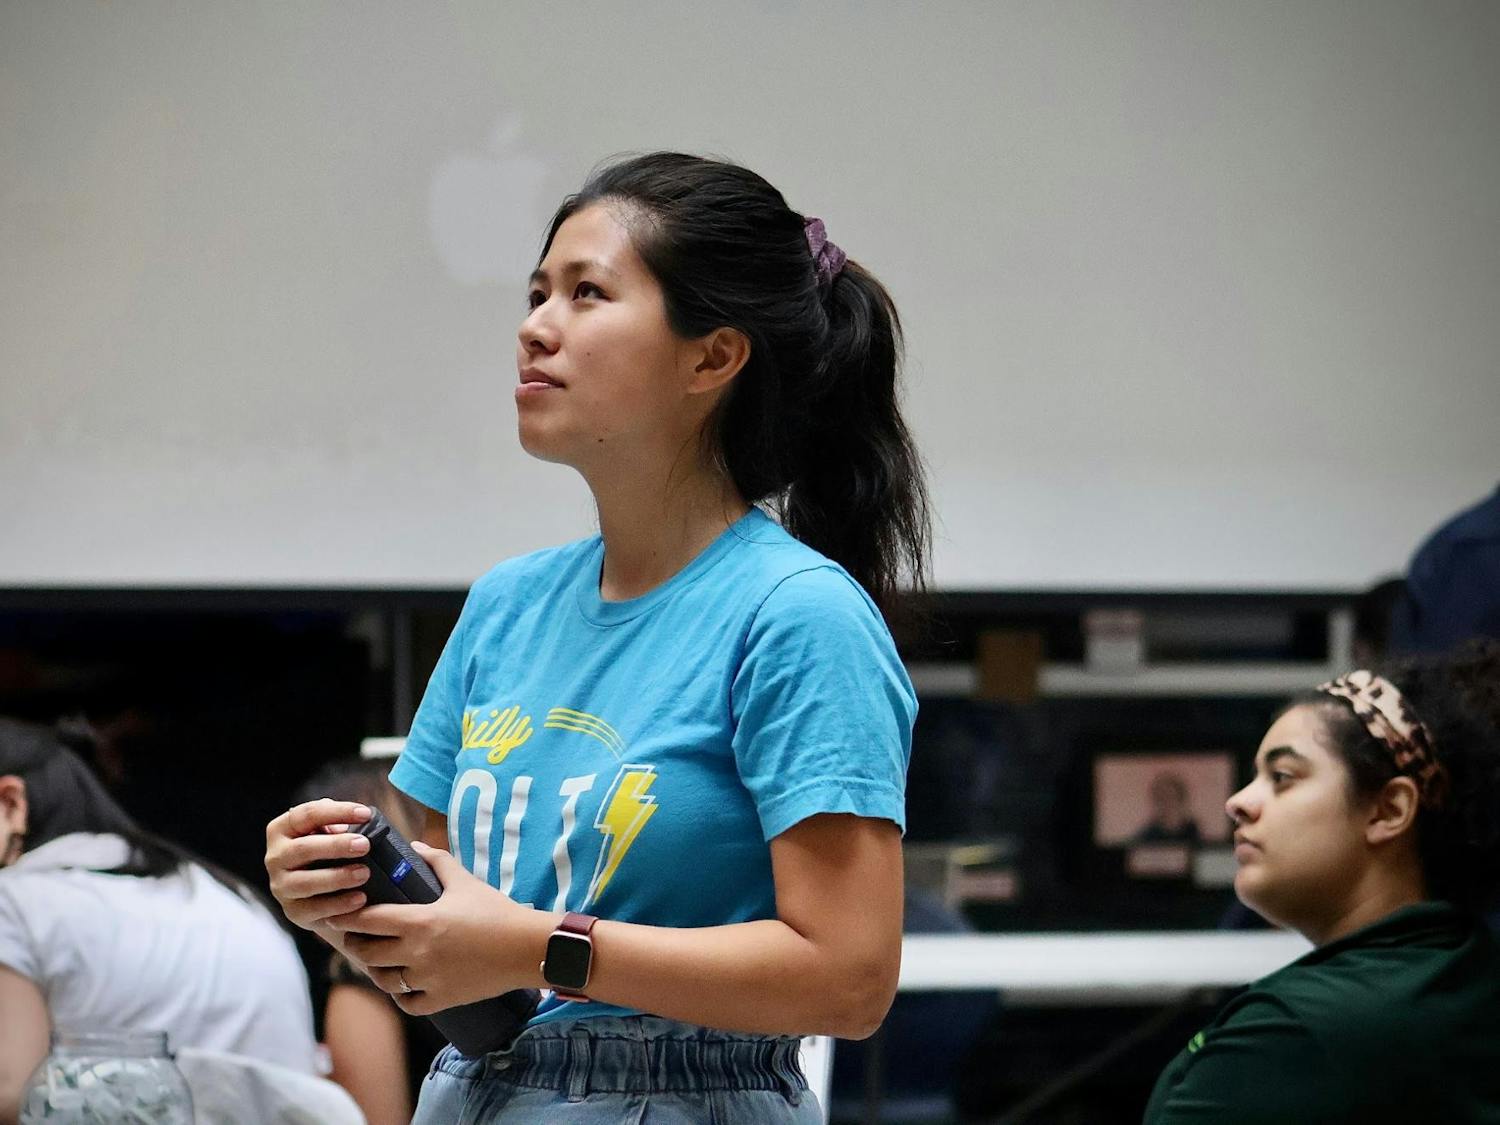 Founder and executive director, Hillary Do, hosted Philly Youth Voices primarily led by students on April 15th at the School District of Philadelphia |